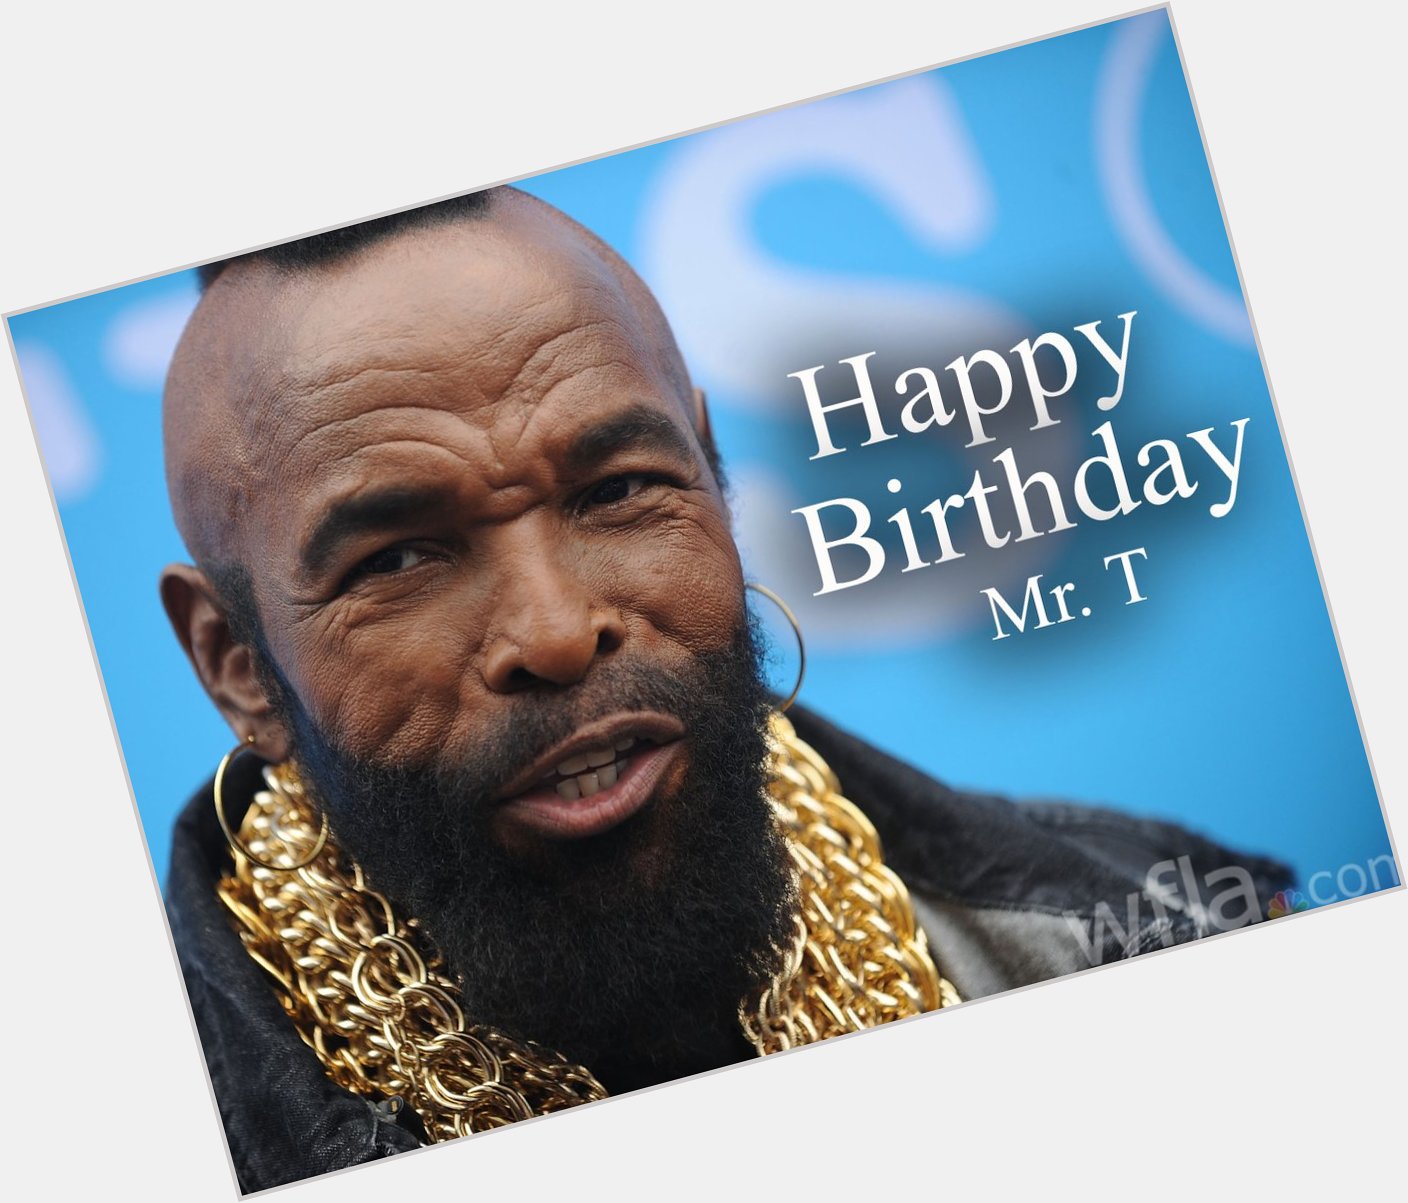 Join us in wishing a happy 69th birthday to Mr. T!  